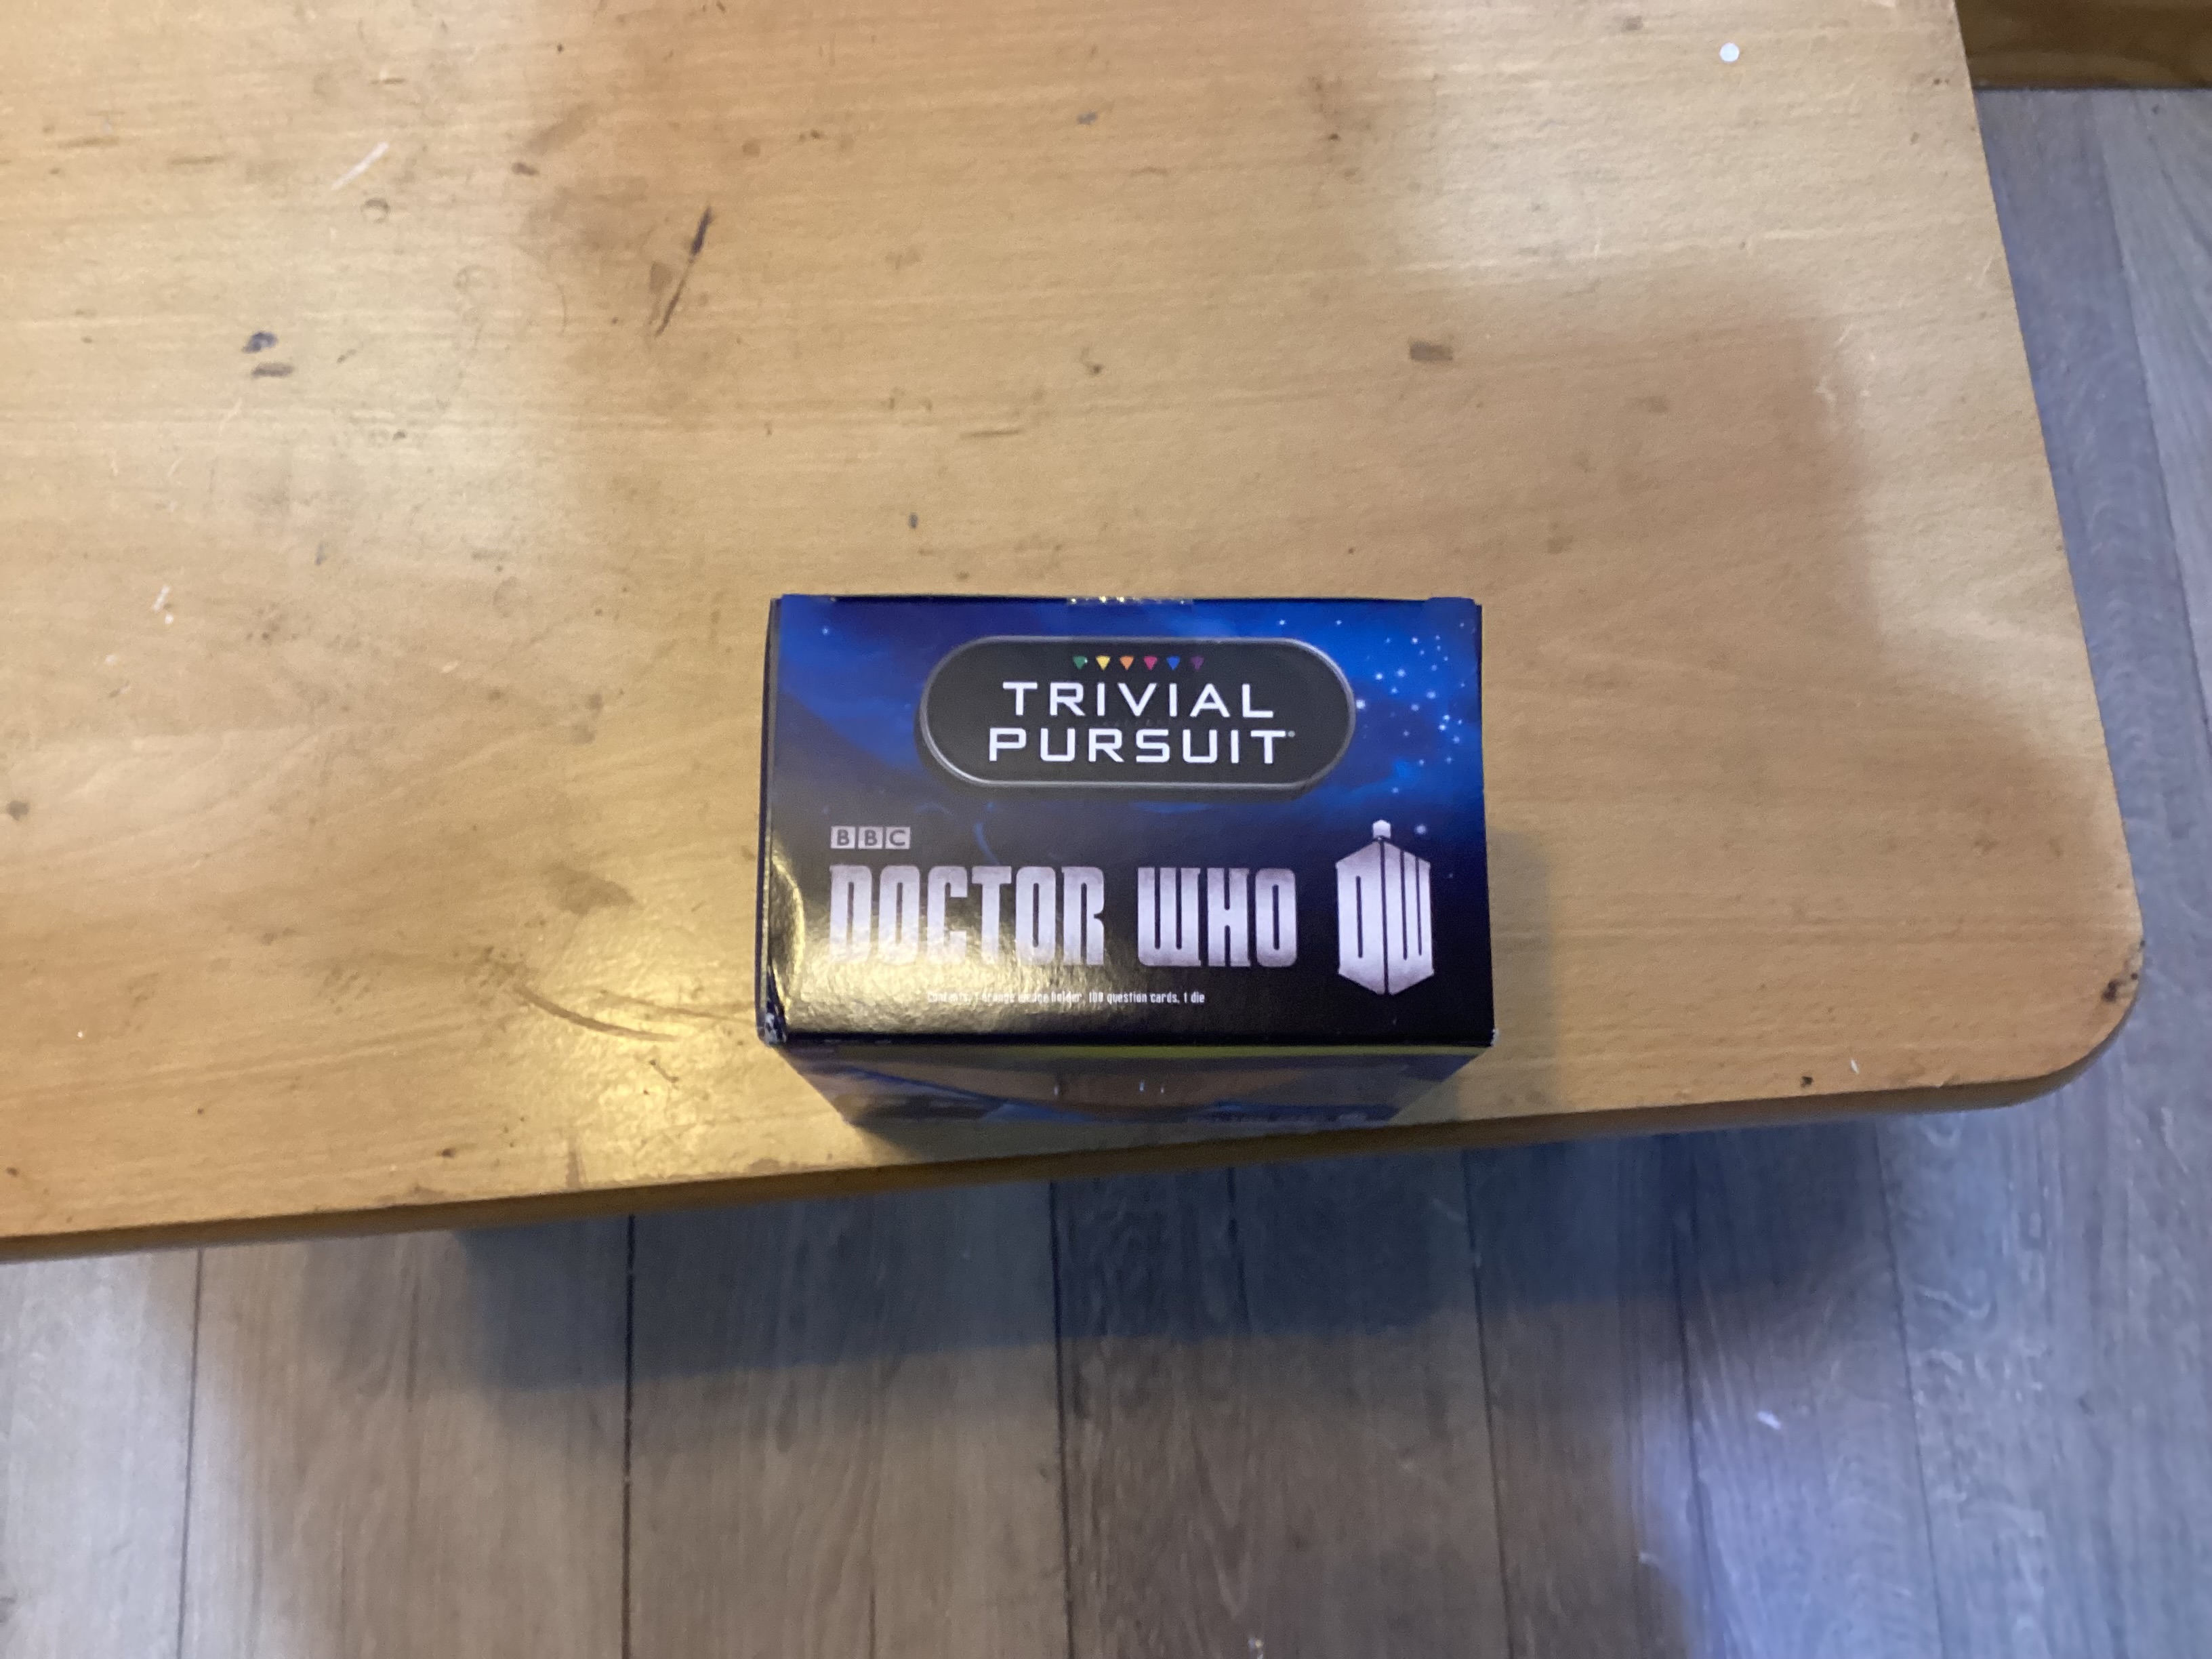 Doctor Who Trivia pursuit